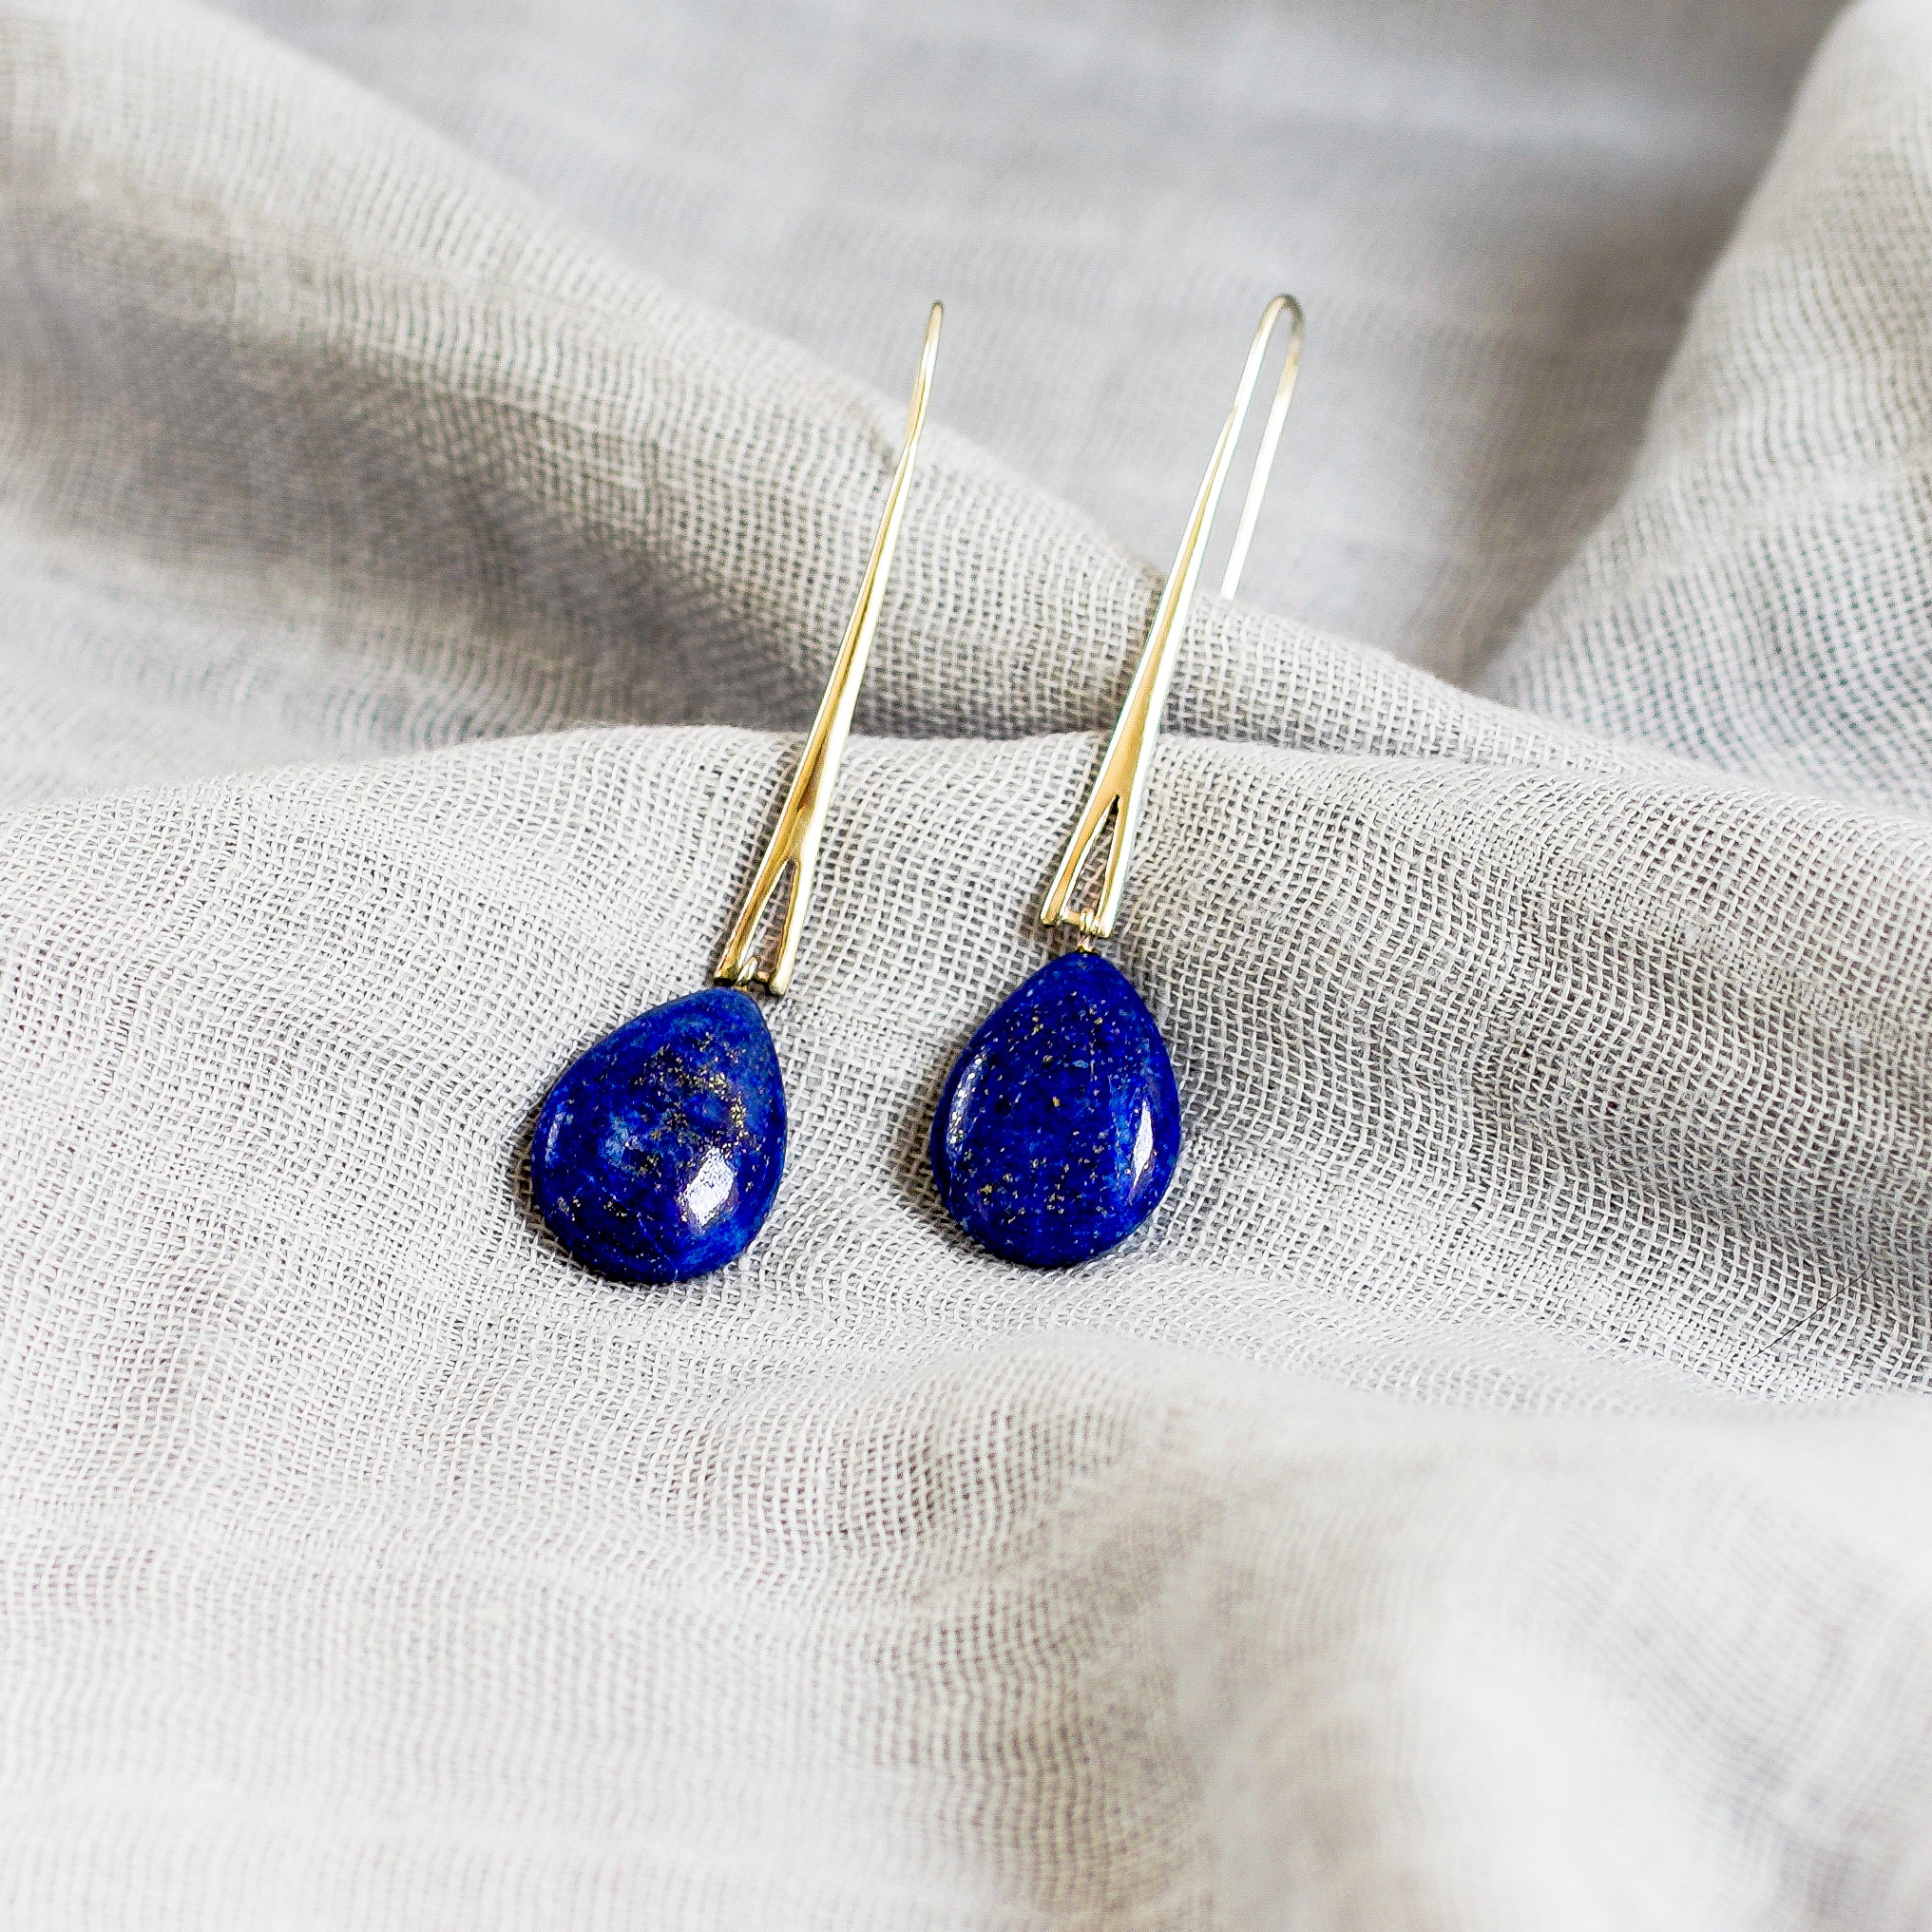 Garden of Desire - Lapis Long Earrings These earrings are ike fresh drops of dew that adorn natural foliage at the dawn of a new day.